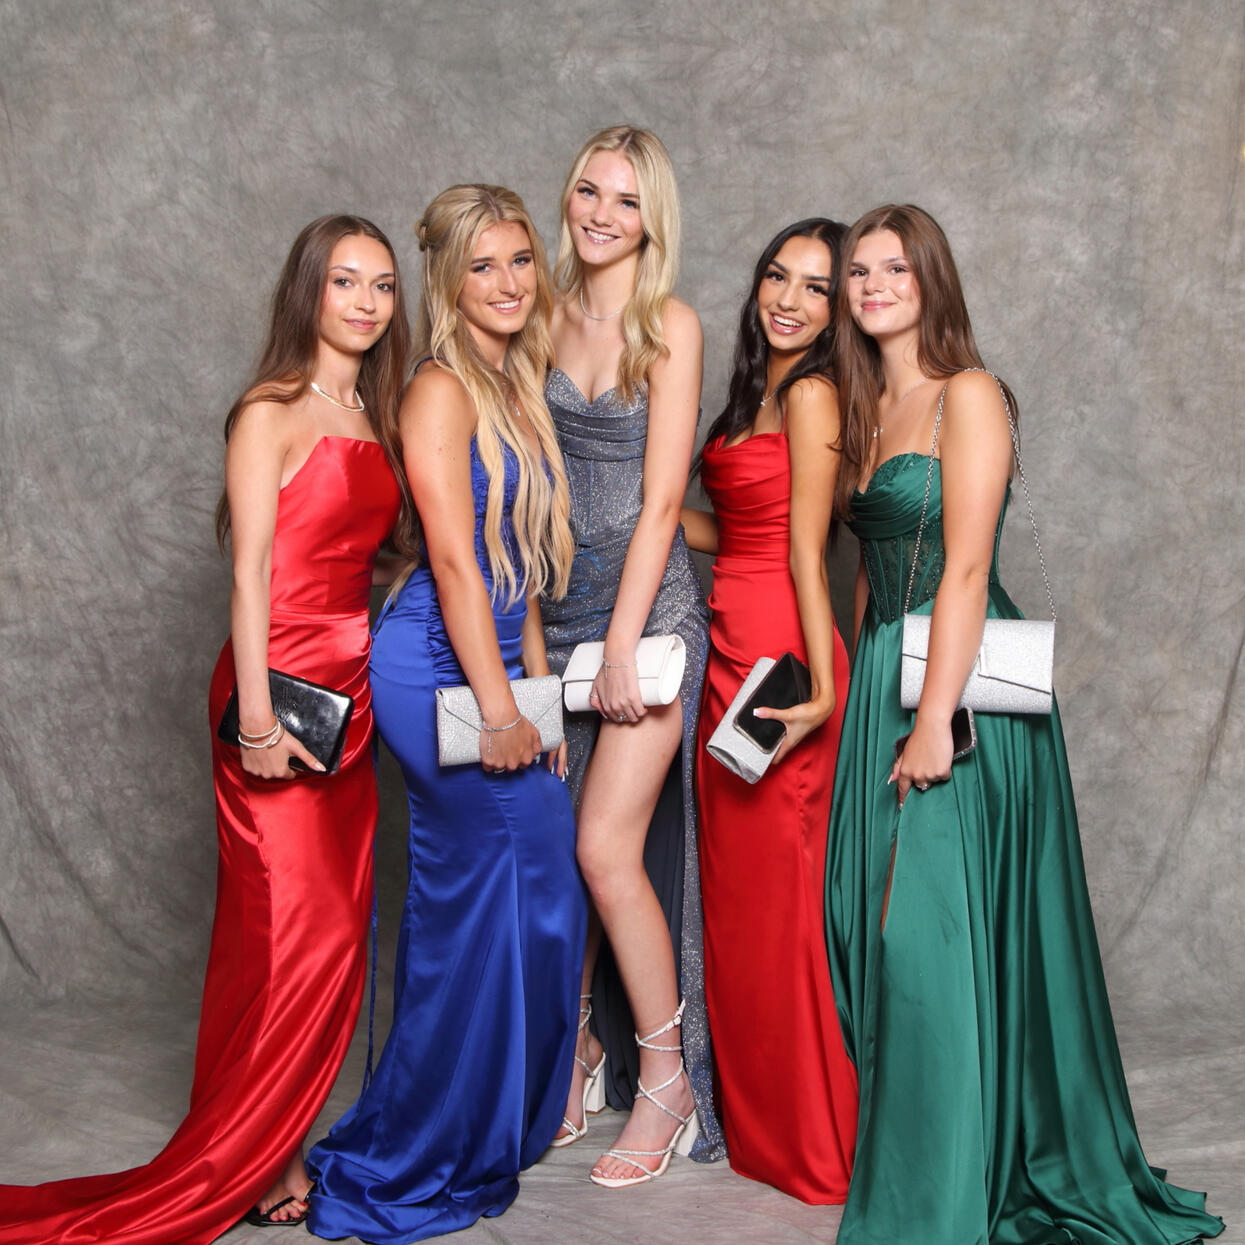 Prom Photography Sussex & Surrey